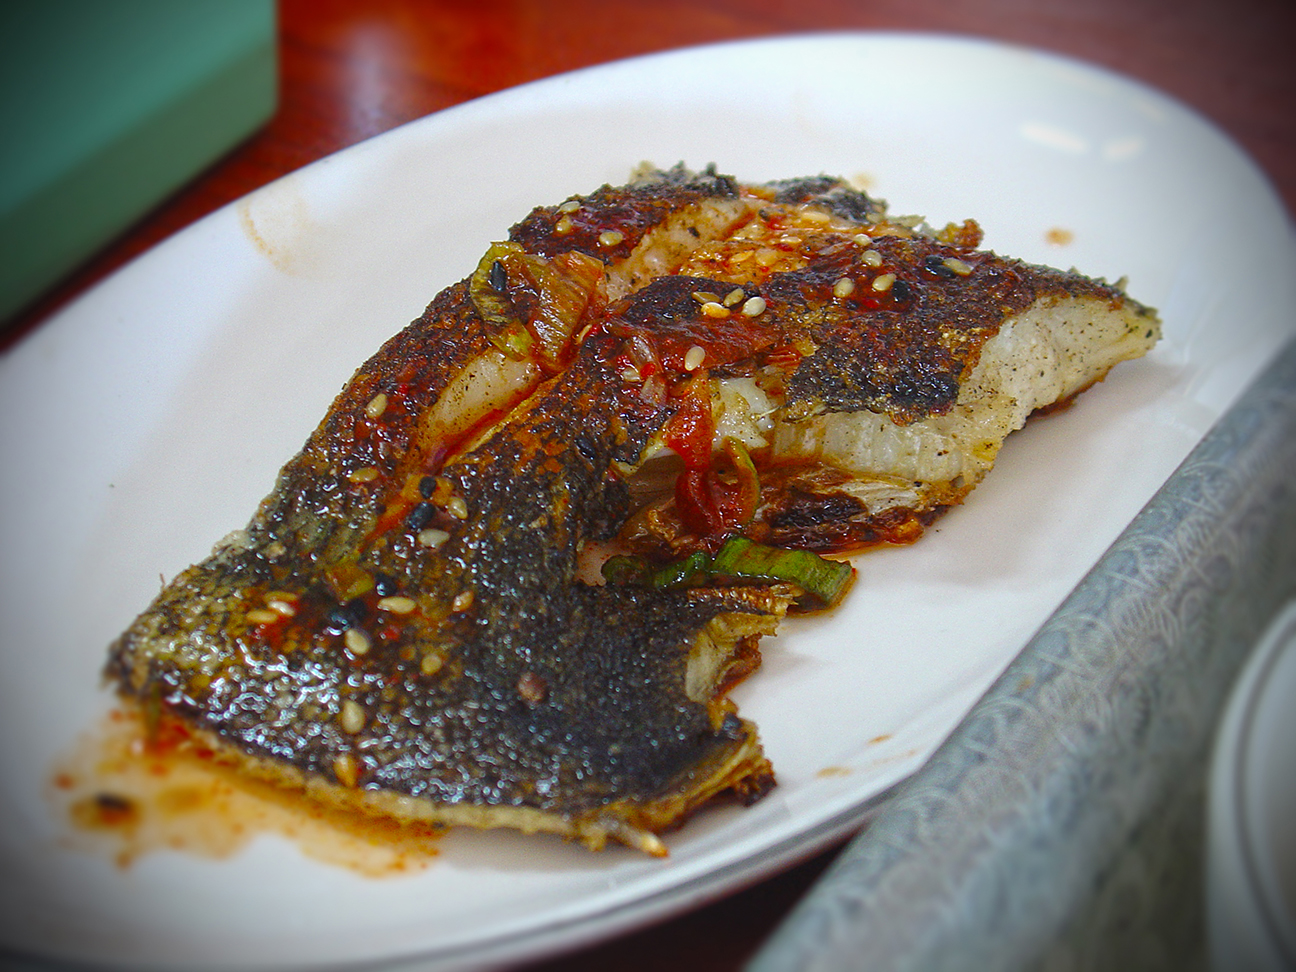 More Grilled Fish!